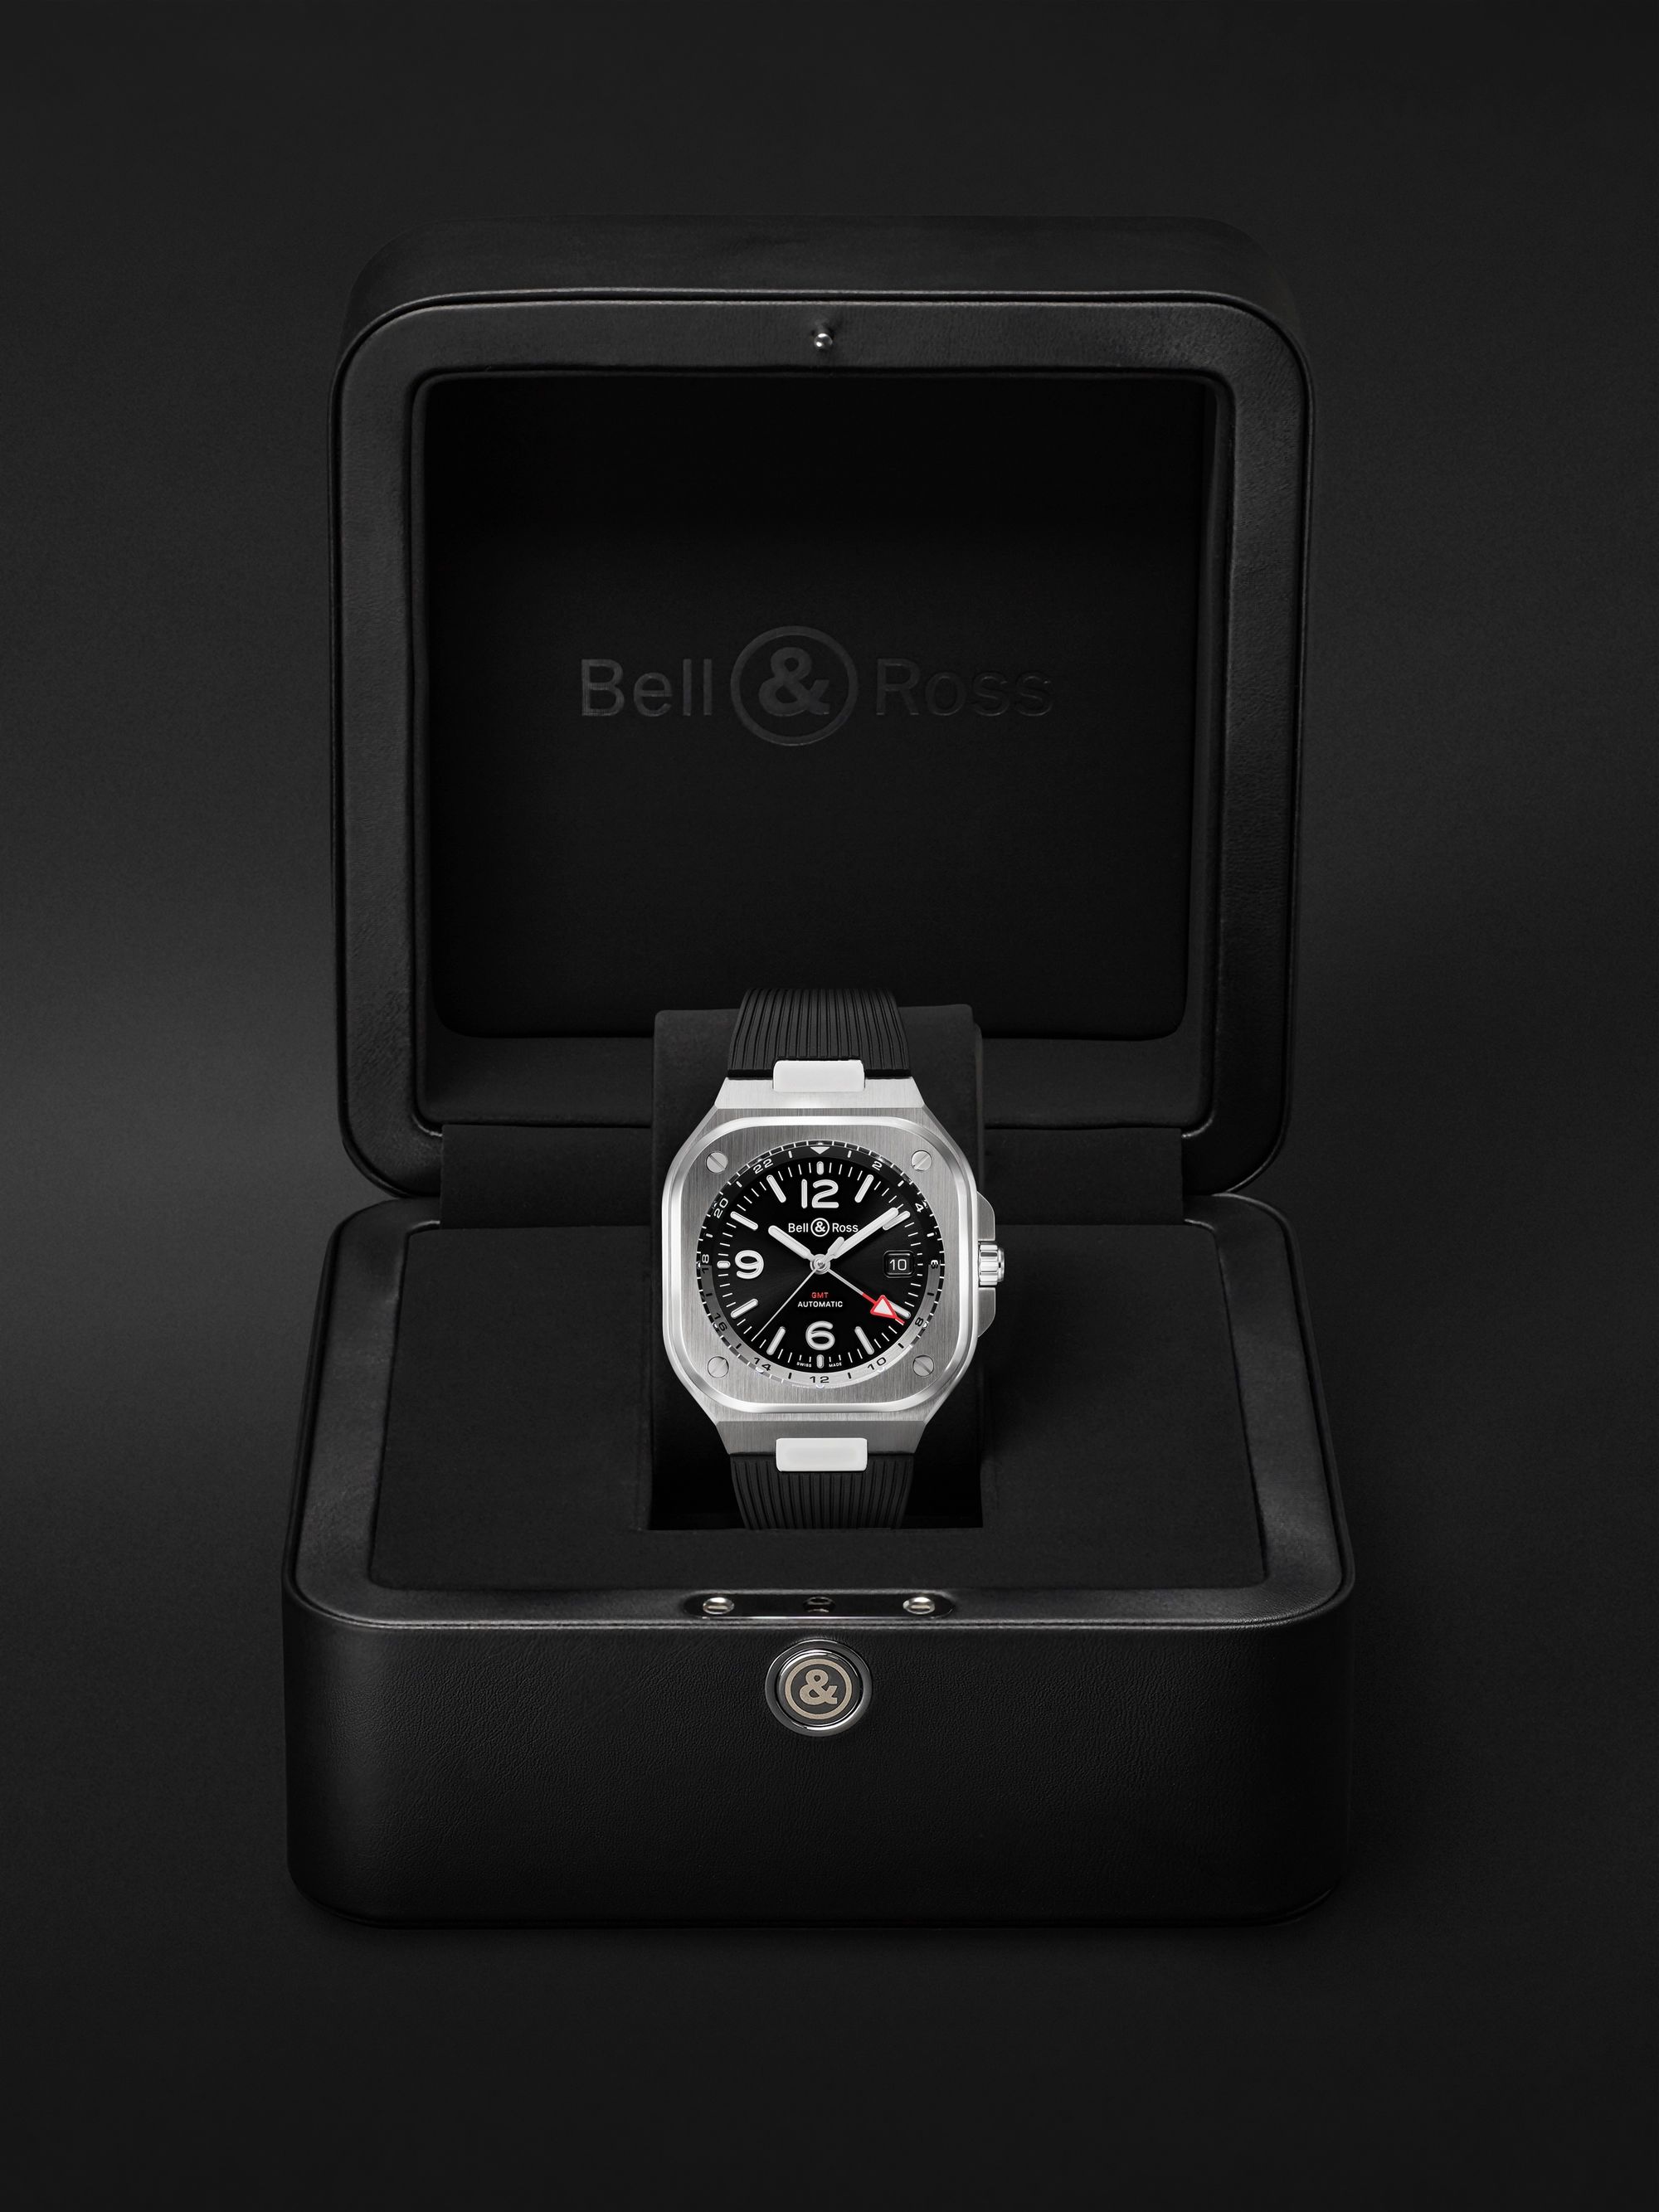 BELL & ROSS GMT Automatic 41mm Stainless Steel and Rubber Watch, Ref. No. BR05G-BL-ST/SRB